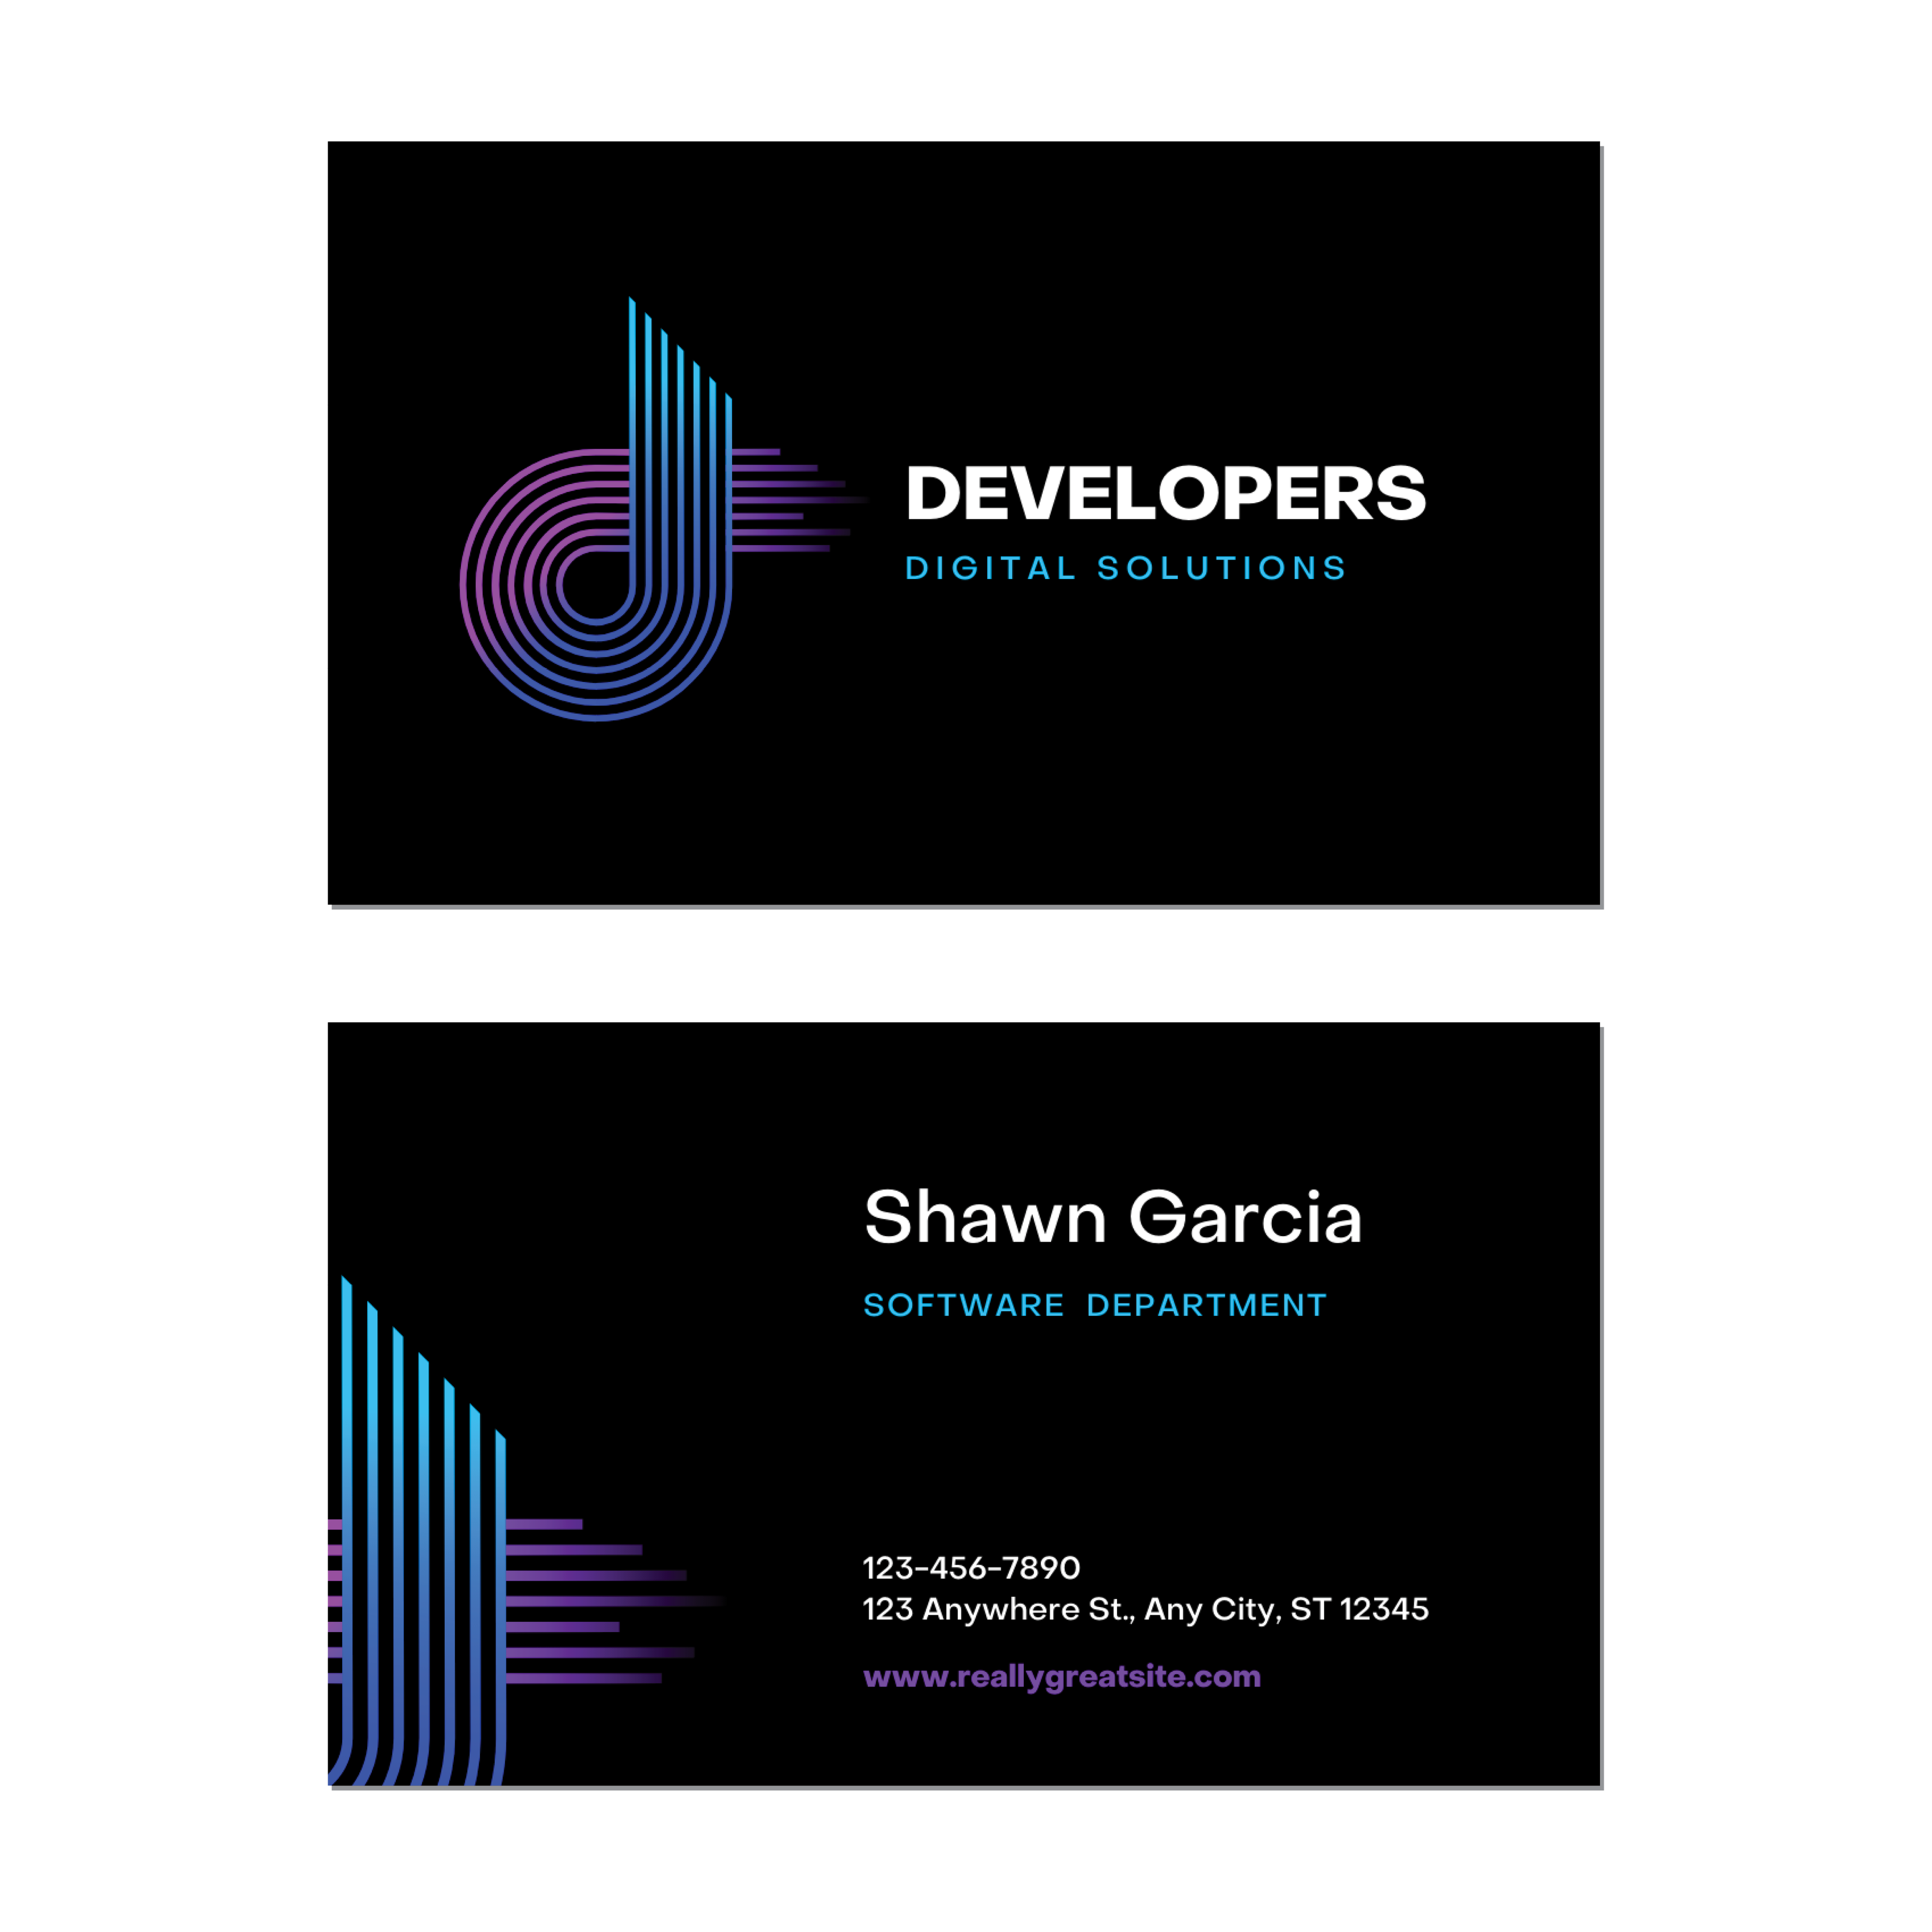 Galaxy Developer - Business Card Template - Two Side